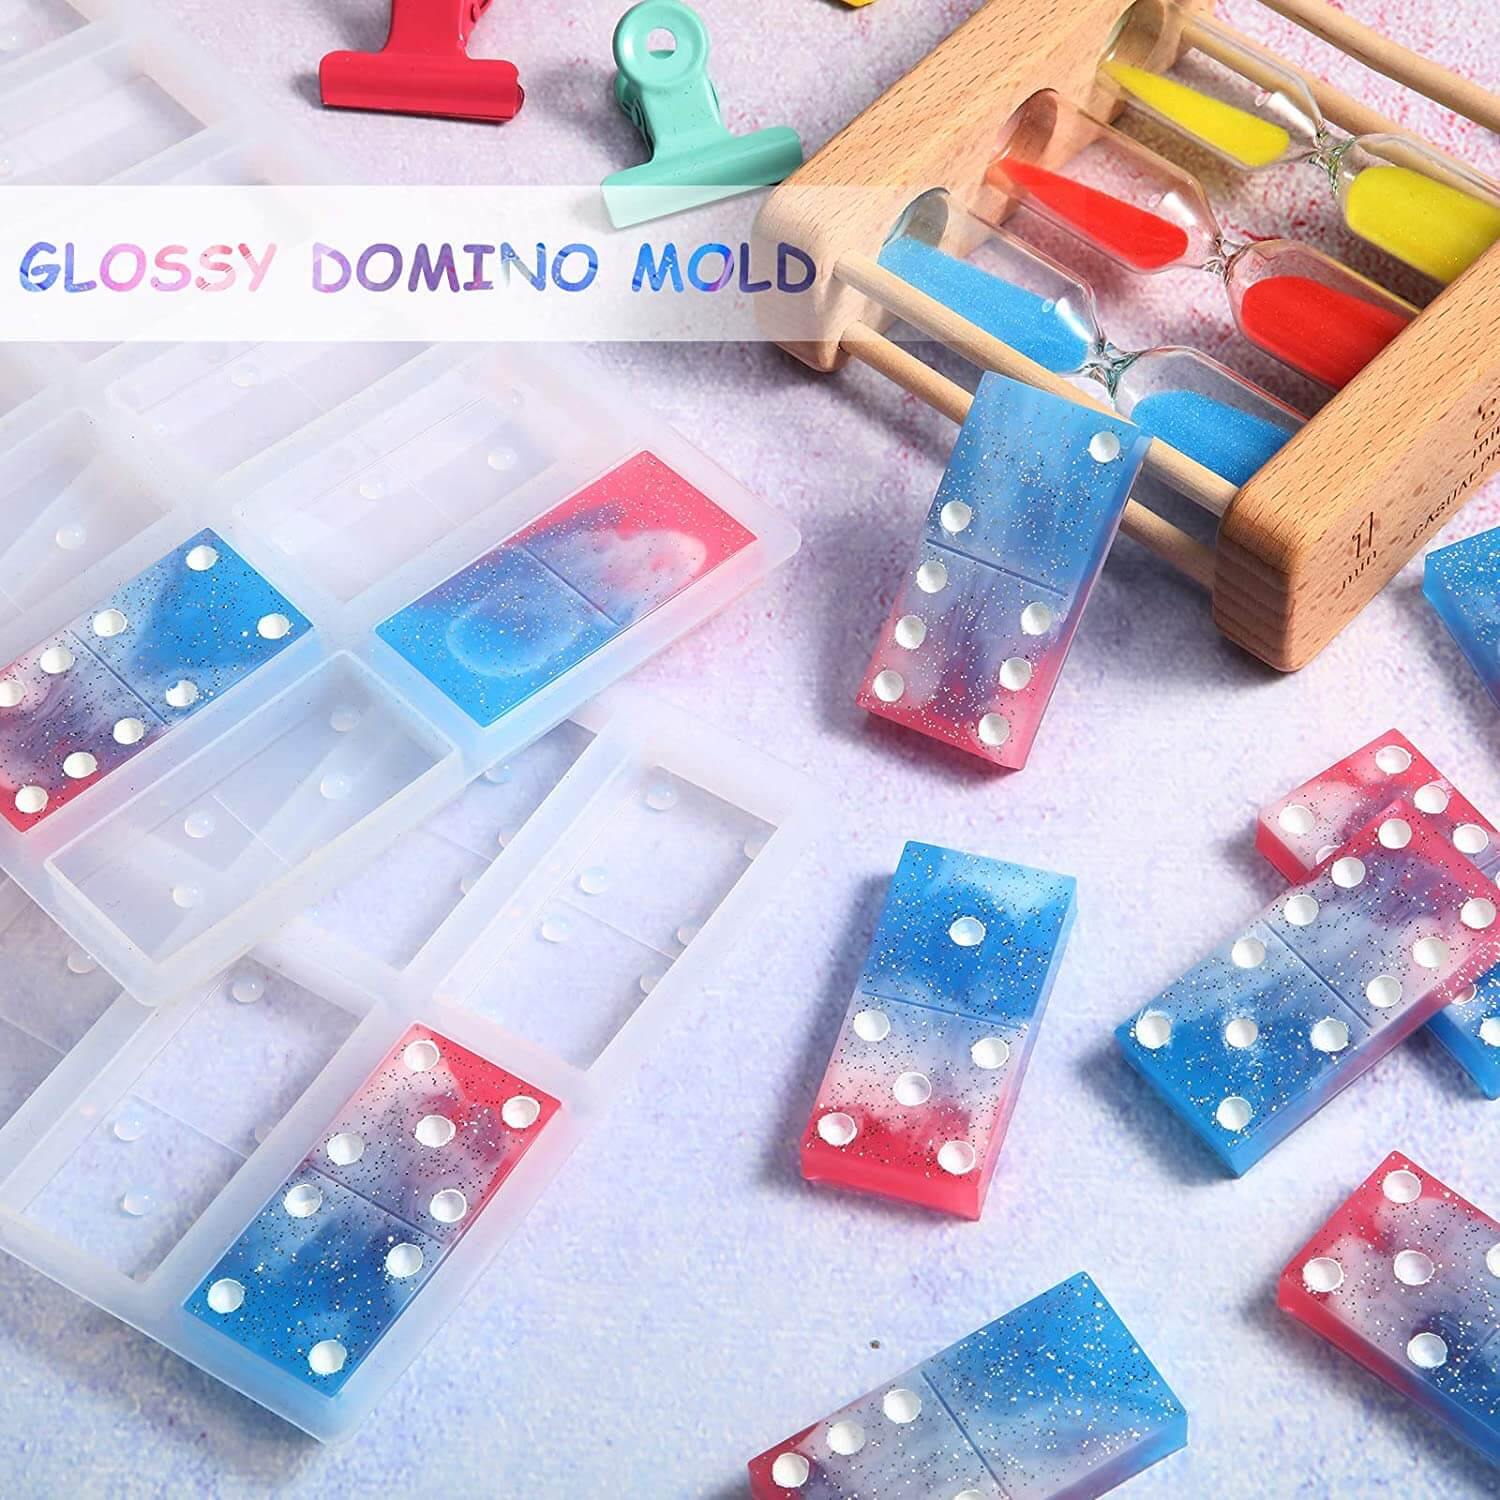 Domino Resin Mold, Domino Molds for Resin Casting – IntoResin